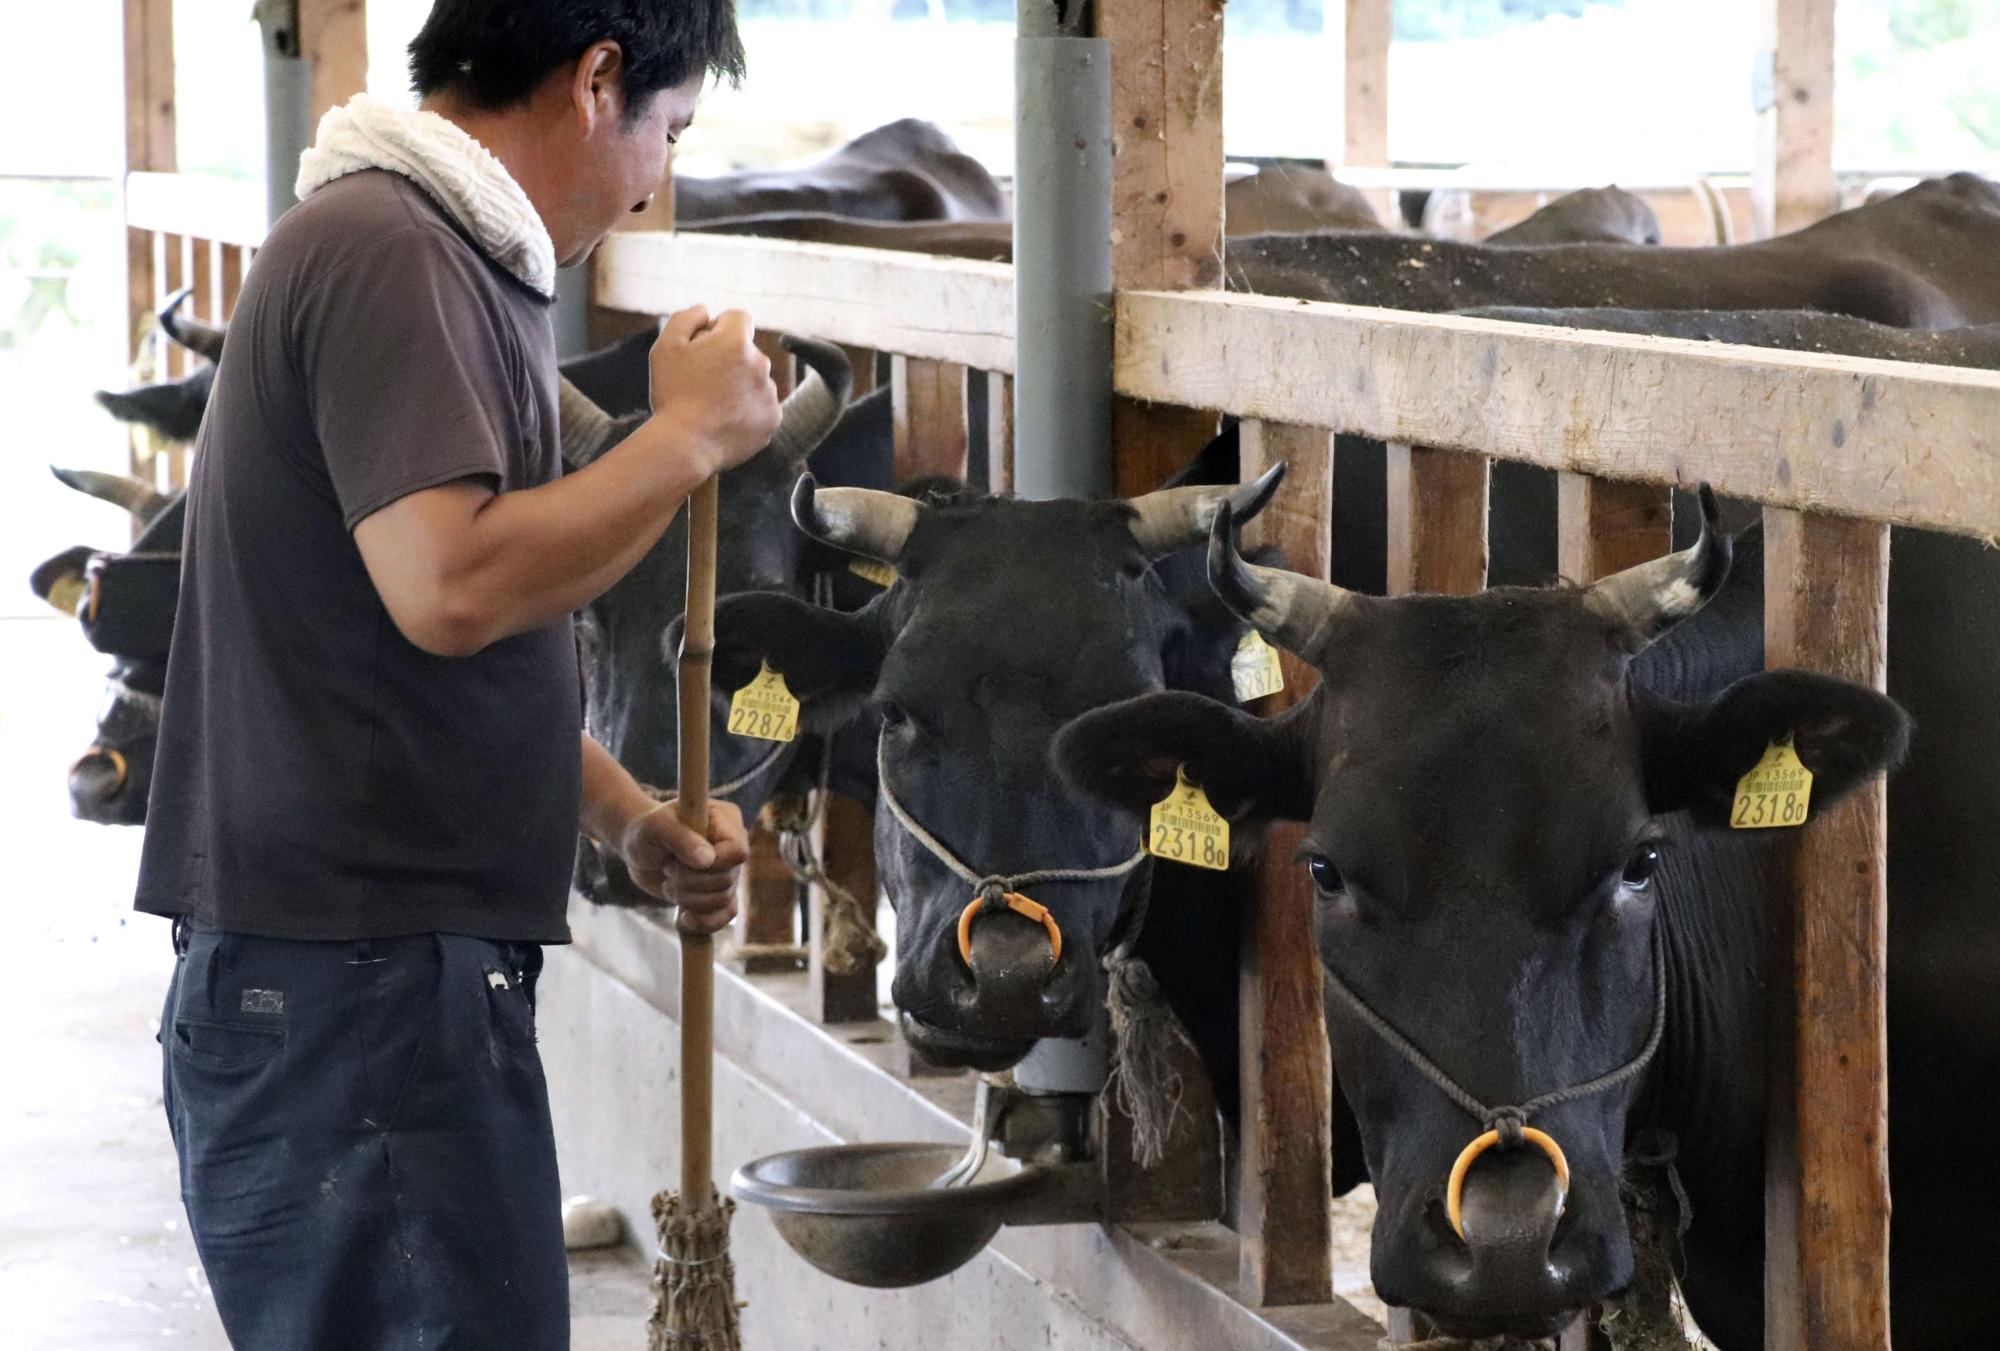 A farmer takes care of beef cattle at his farm in Hoki, Tottori Prefecture, in August. According to sources, the United States has agreed to increase its low-tariff quota for Japanese beef. | KYODO